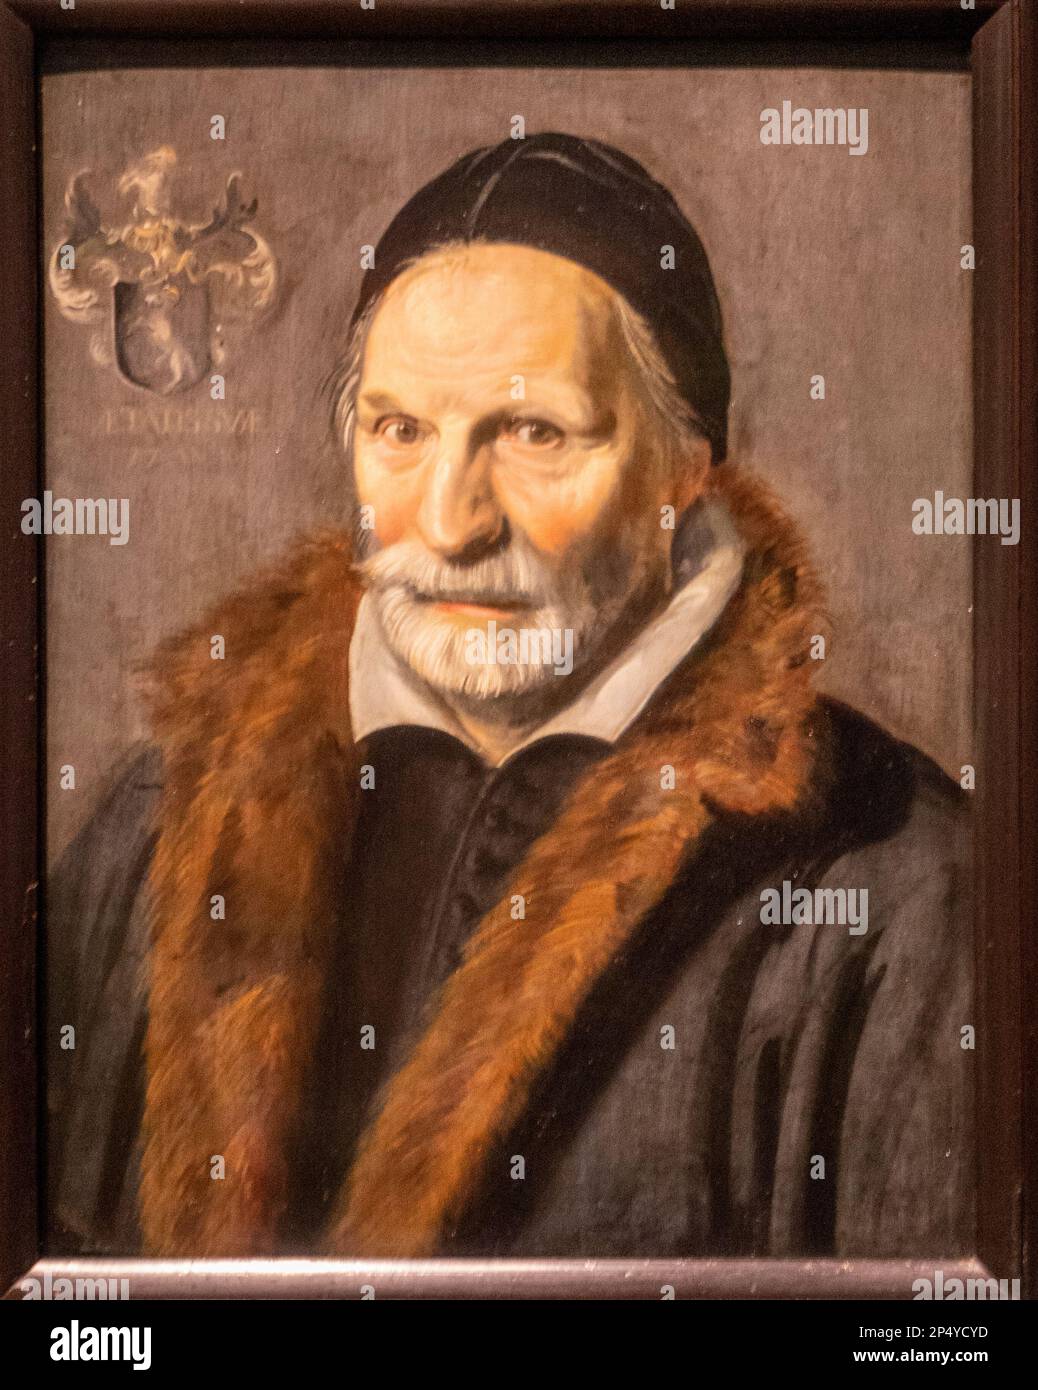 'Portrait of Jacobus Zaffius' by Frans hals, 1611 Stock Photo